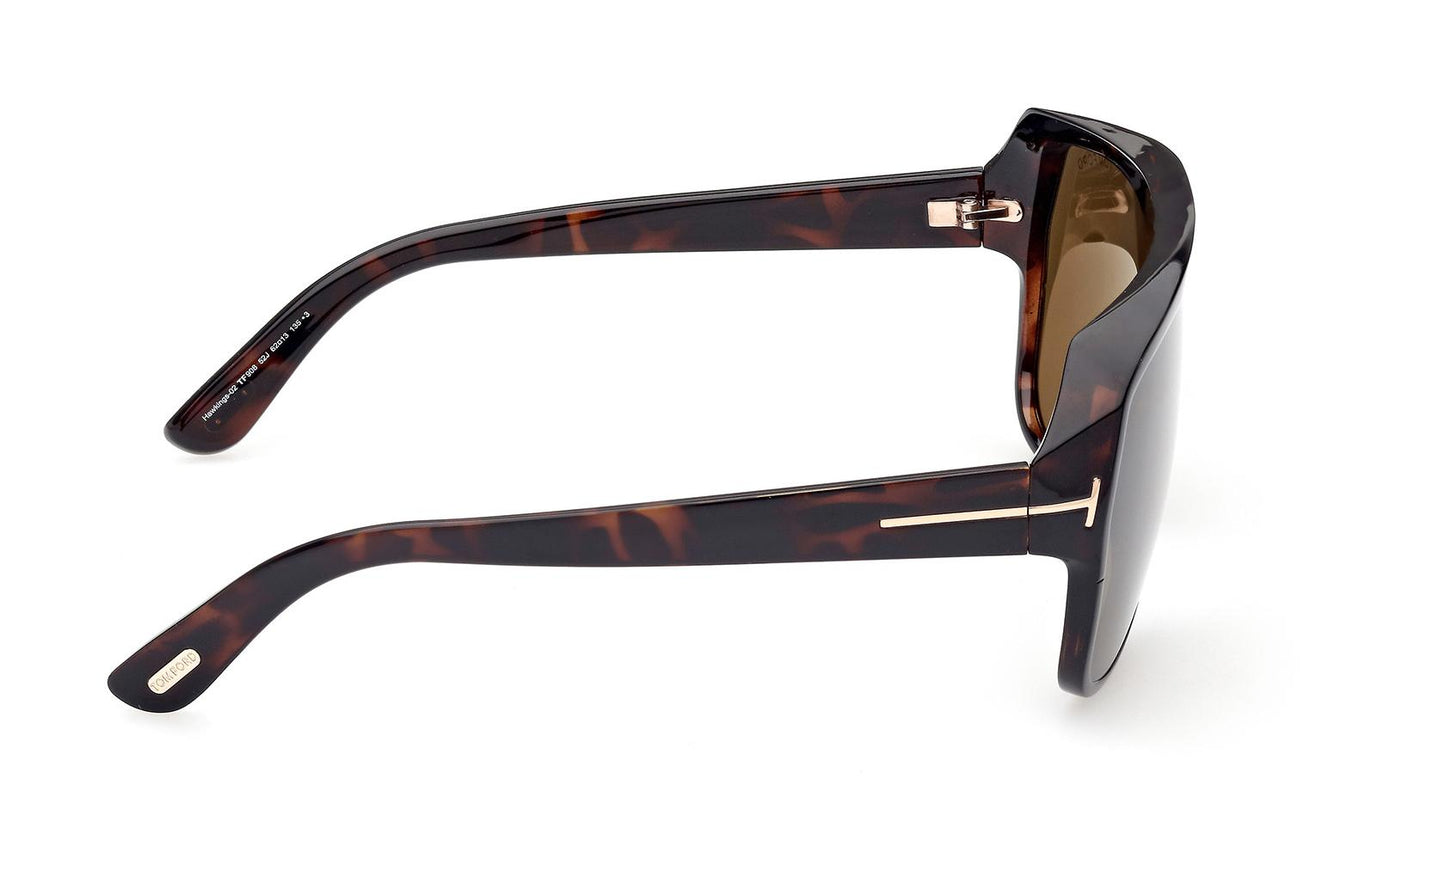 Load image into Gallery viewer, Tom Ford Hawkings-02 Sunglasses FT0908 52J
